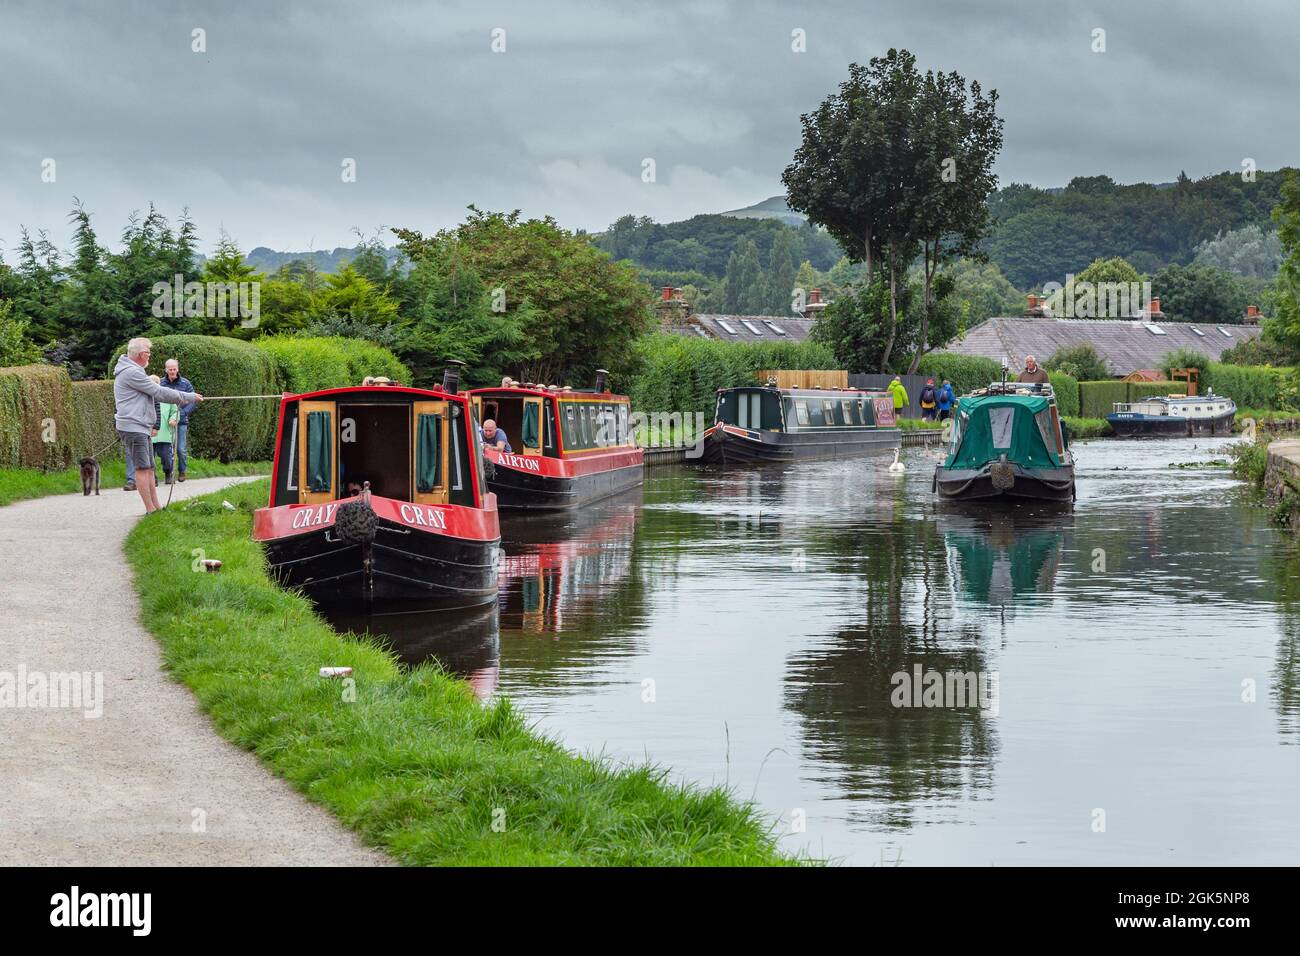 Barges (flat bottomed boats/narrowboats) on the Leeds Liverpool Canal at Micklethwaite, near Bingley, West Yorkshire. Stock Photo